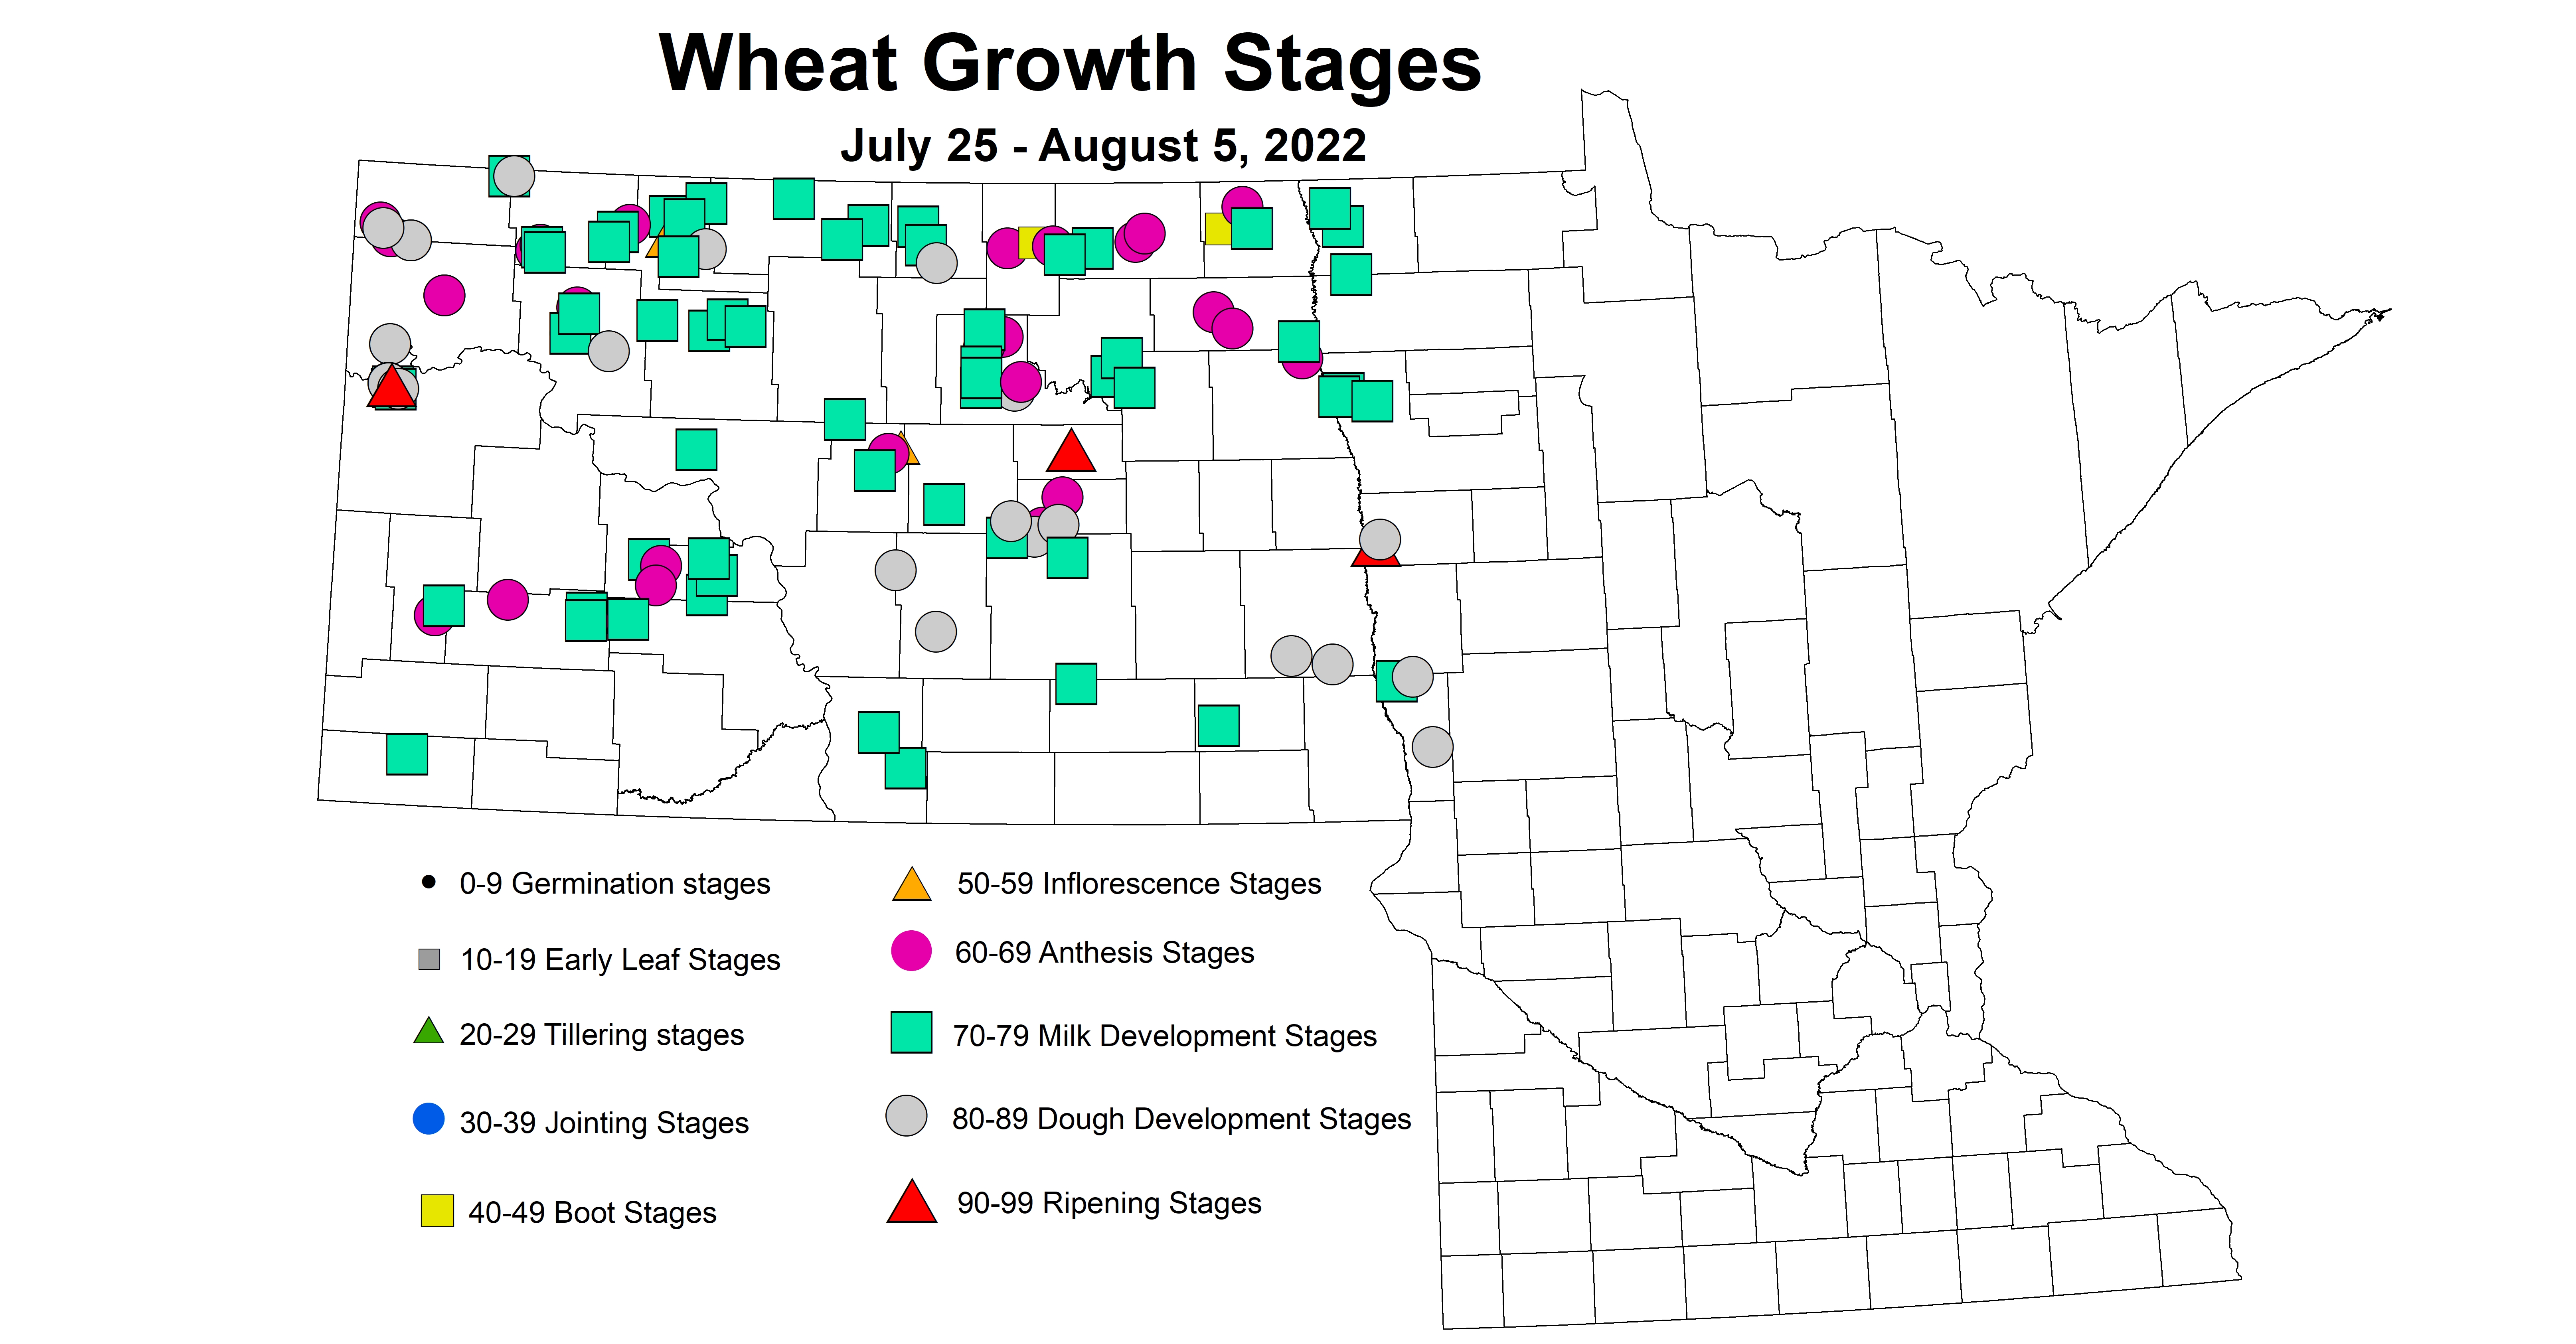 wheat growth stages 2022 7.25-8.5